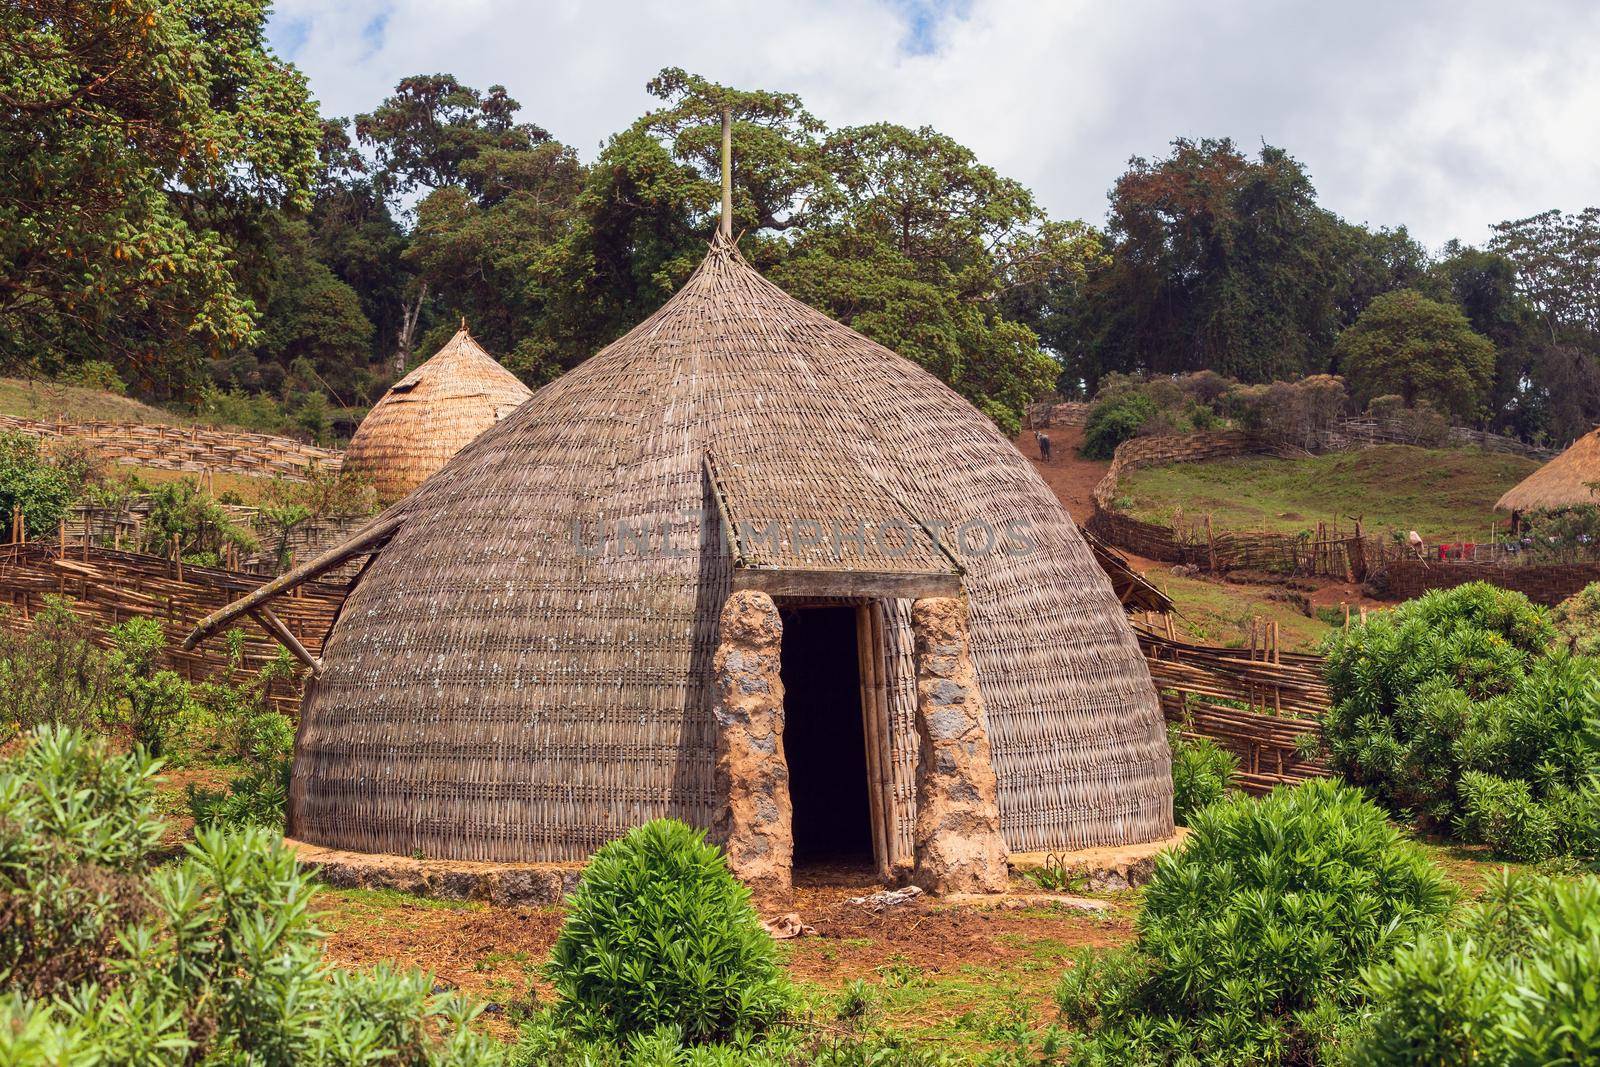 Beautiful architecture with traditional ethiopian houses, Bale Mountain Ethiopia, Africa.